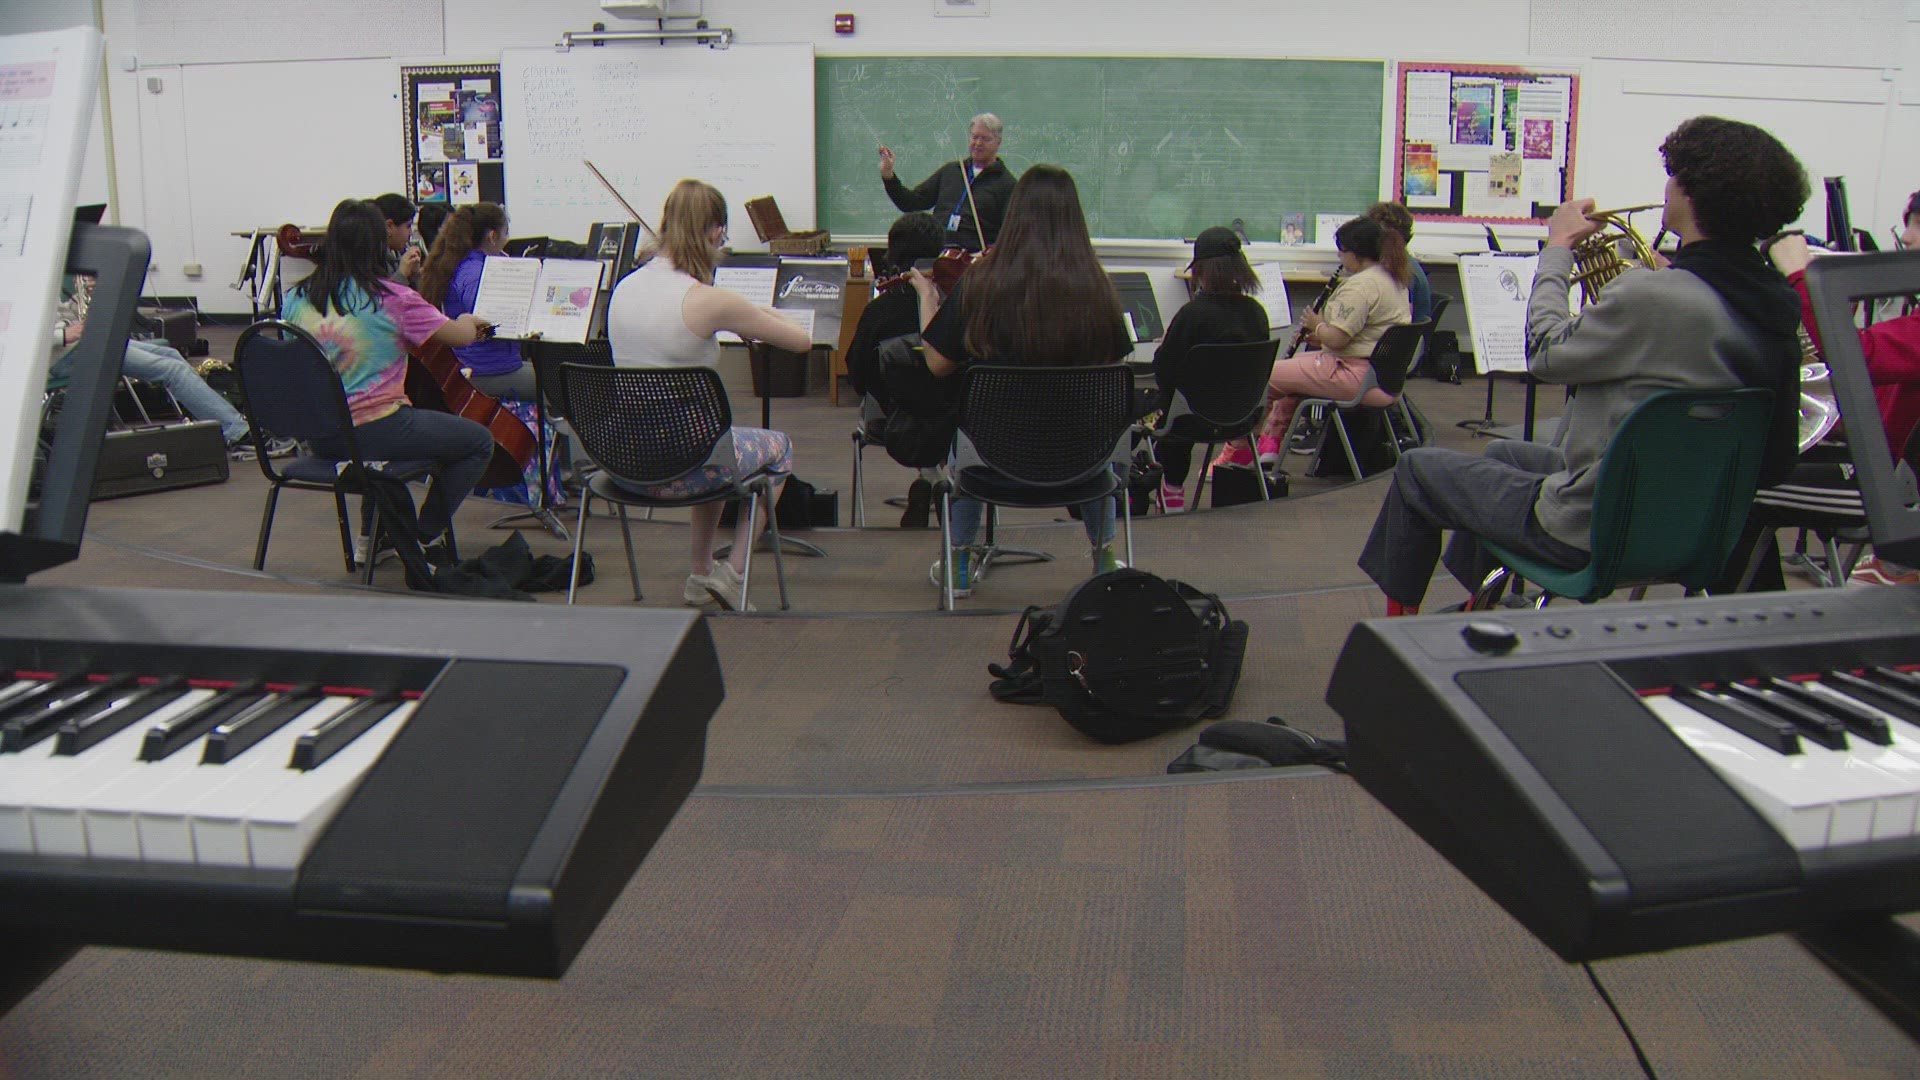 Band director Rick Grassler turns to nonprofit Bringing Music to Life for instruments for his students. The nonprofit needs money donations to repair instruments.